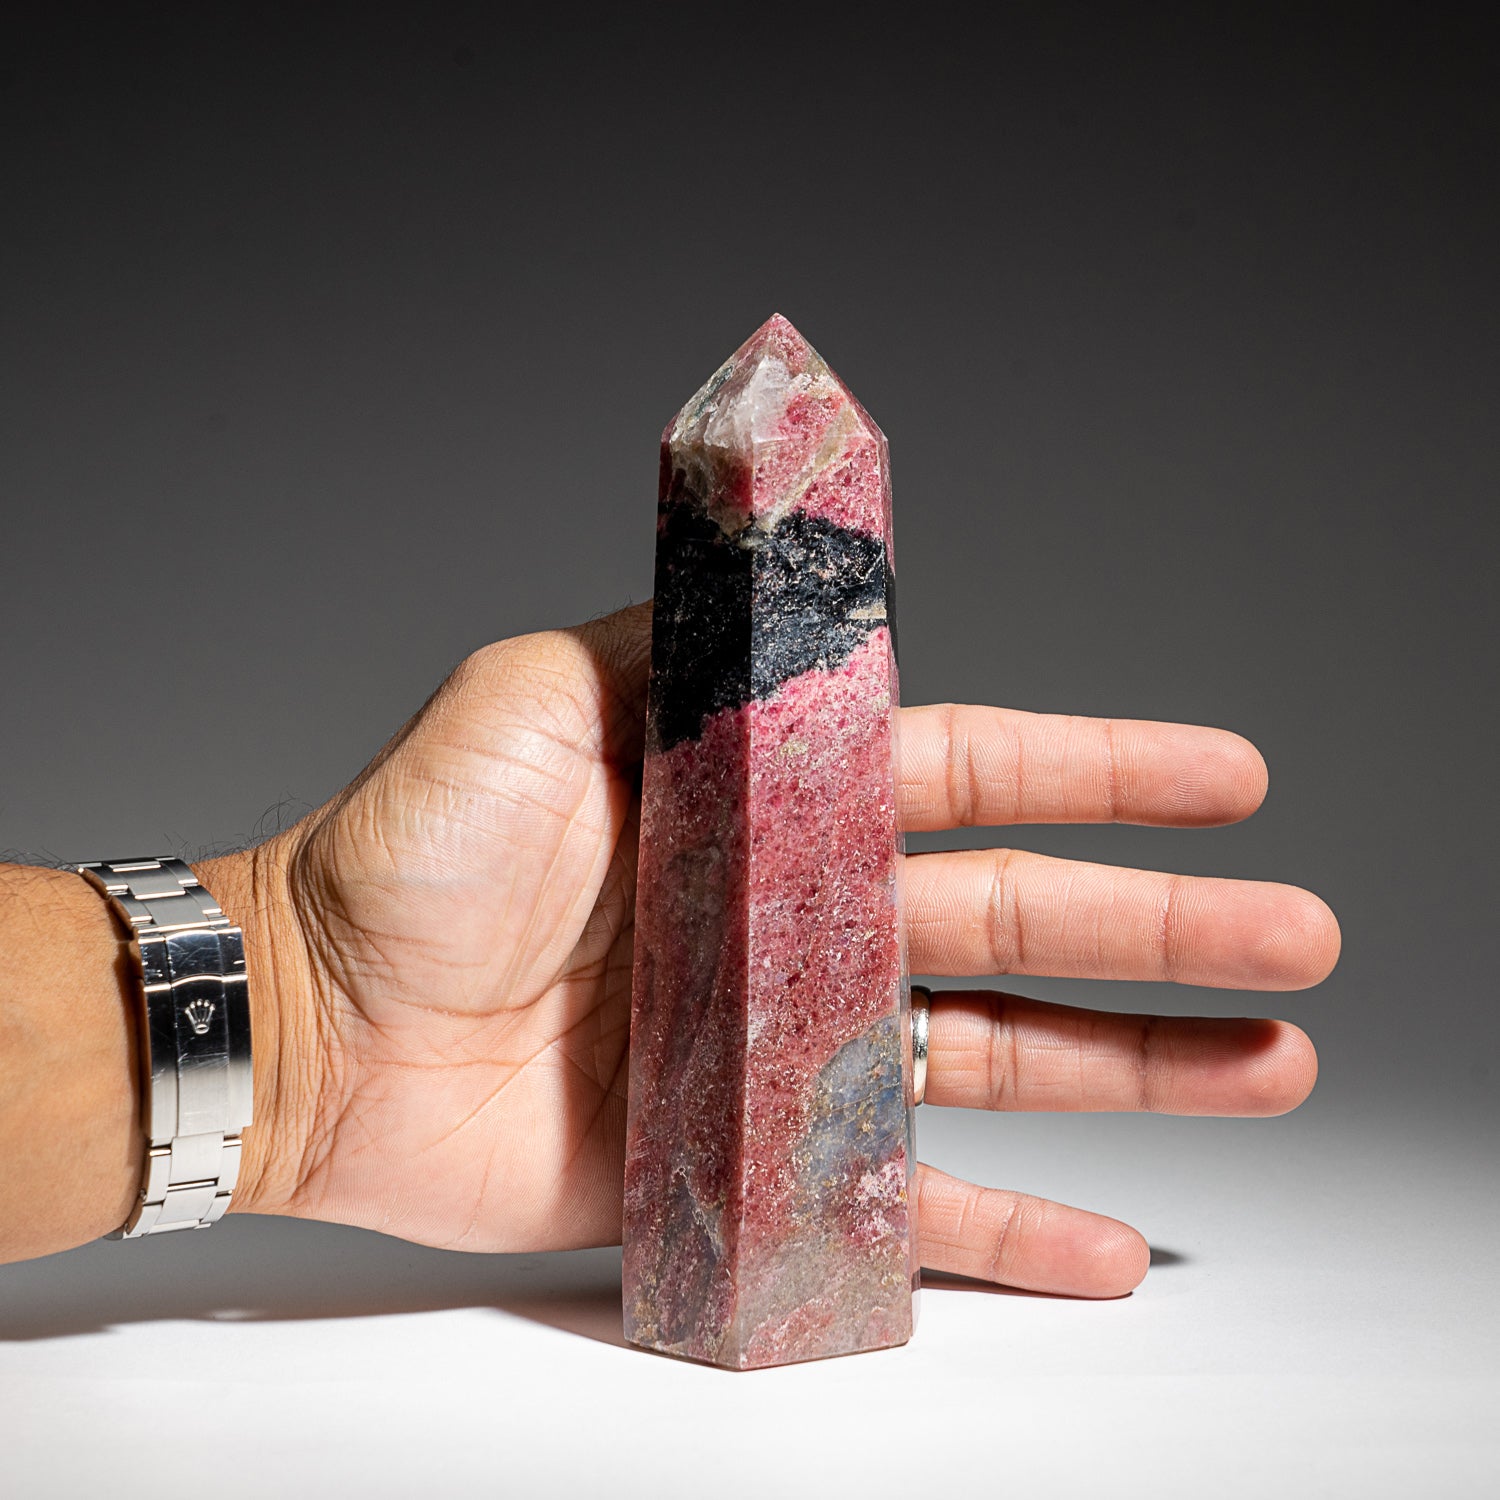 Genuine Polished Ruby Point from Madagascar (1.6 lbs)